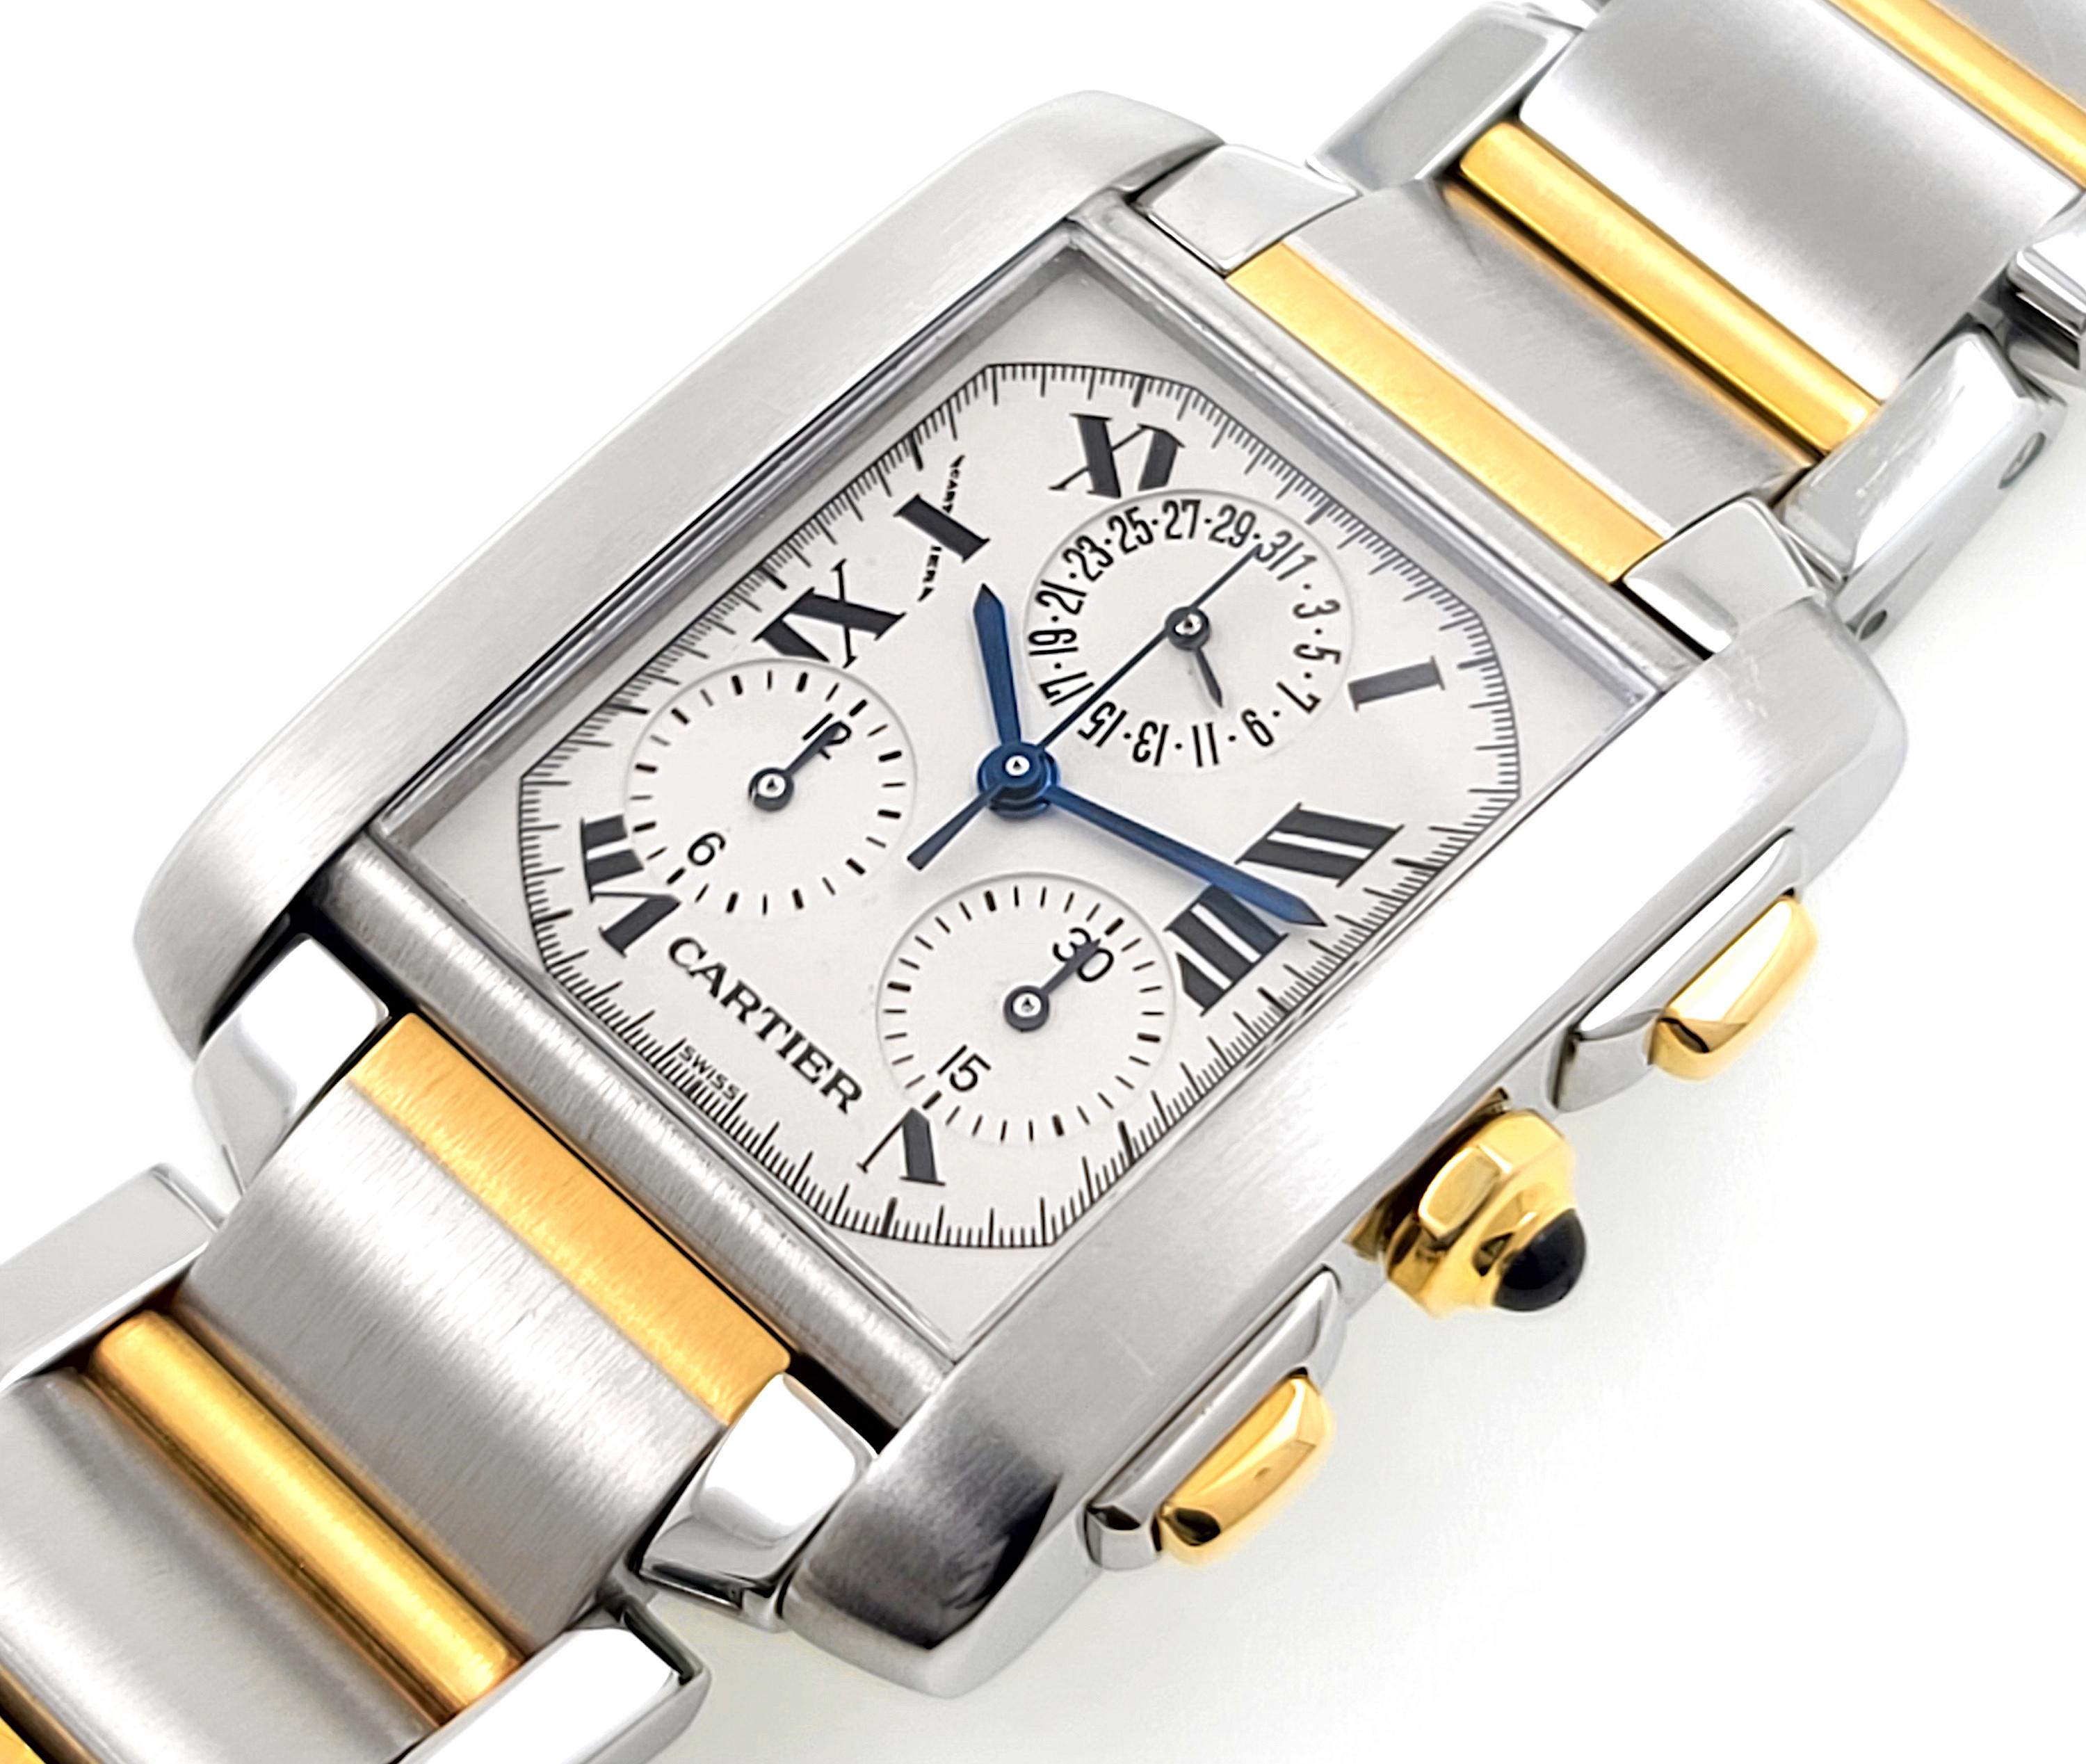 Cartier Tank Française 2303 Serviced Steel & 18k Gold Chronograph Chronoreflex In Excellent Condition For Sale In Neuilly-sur-Seine, IDF